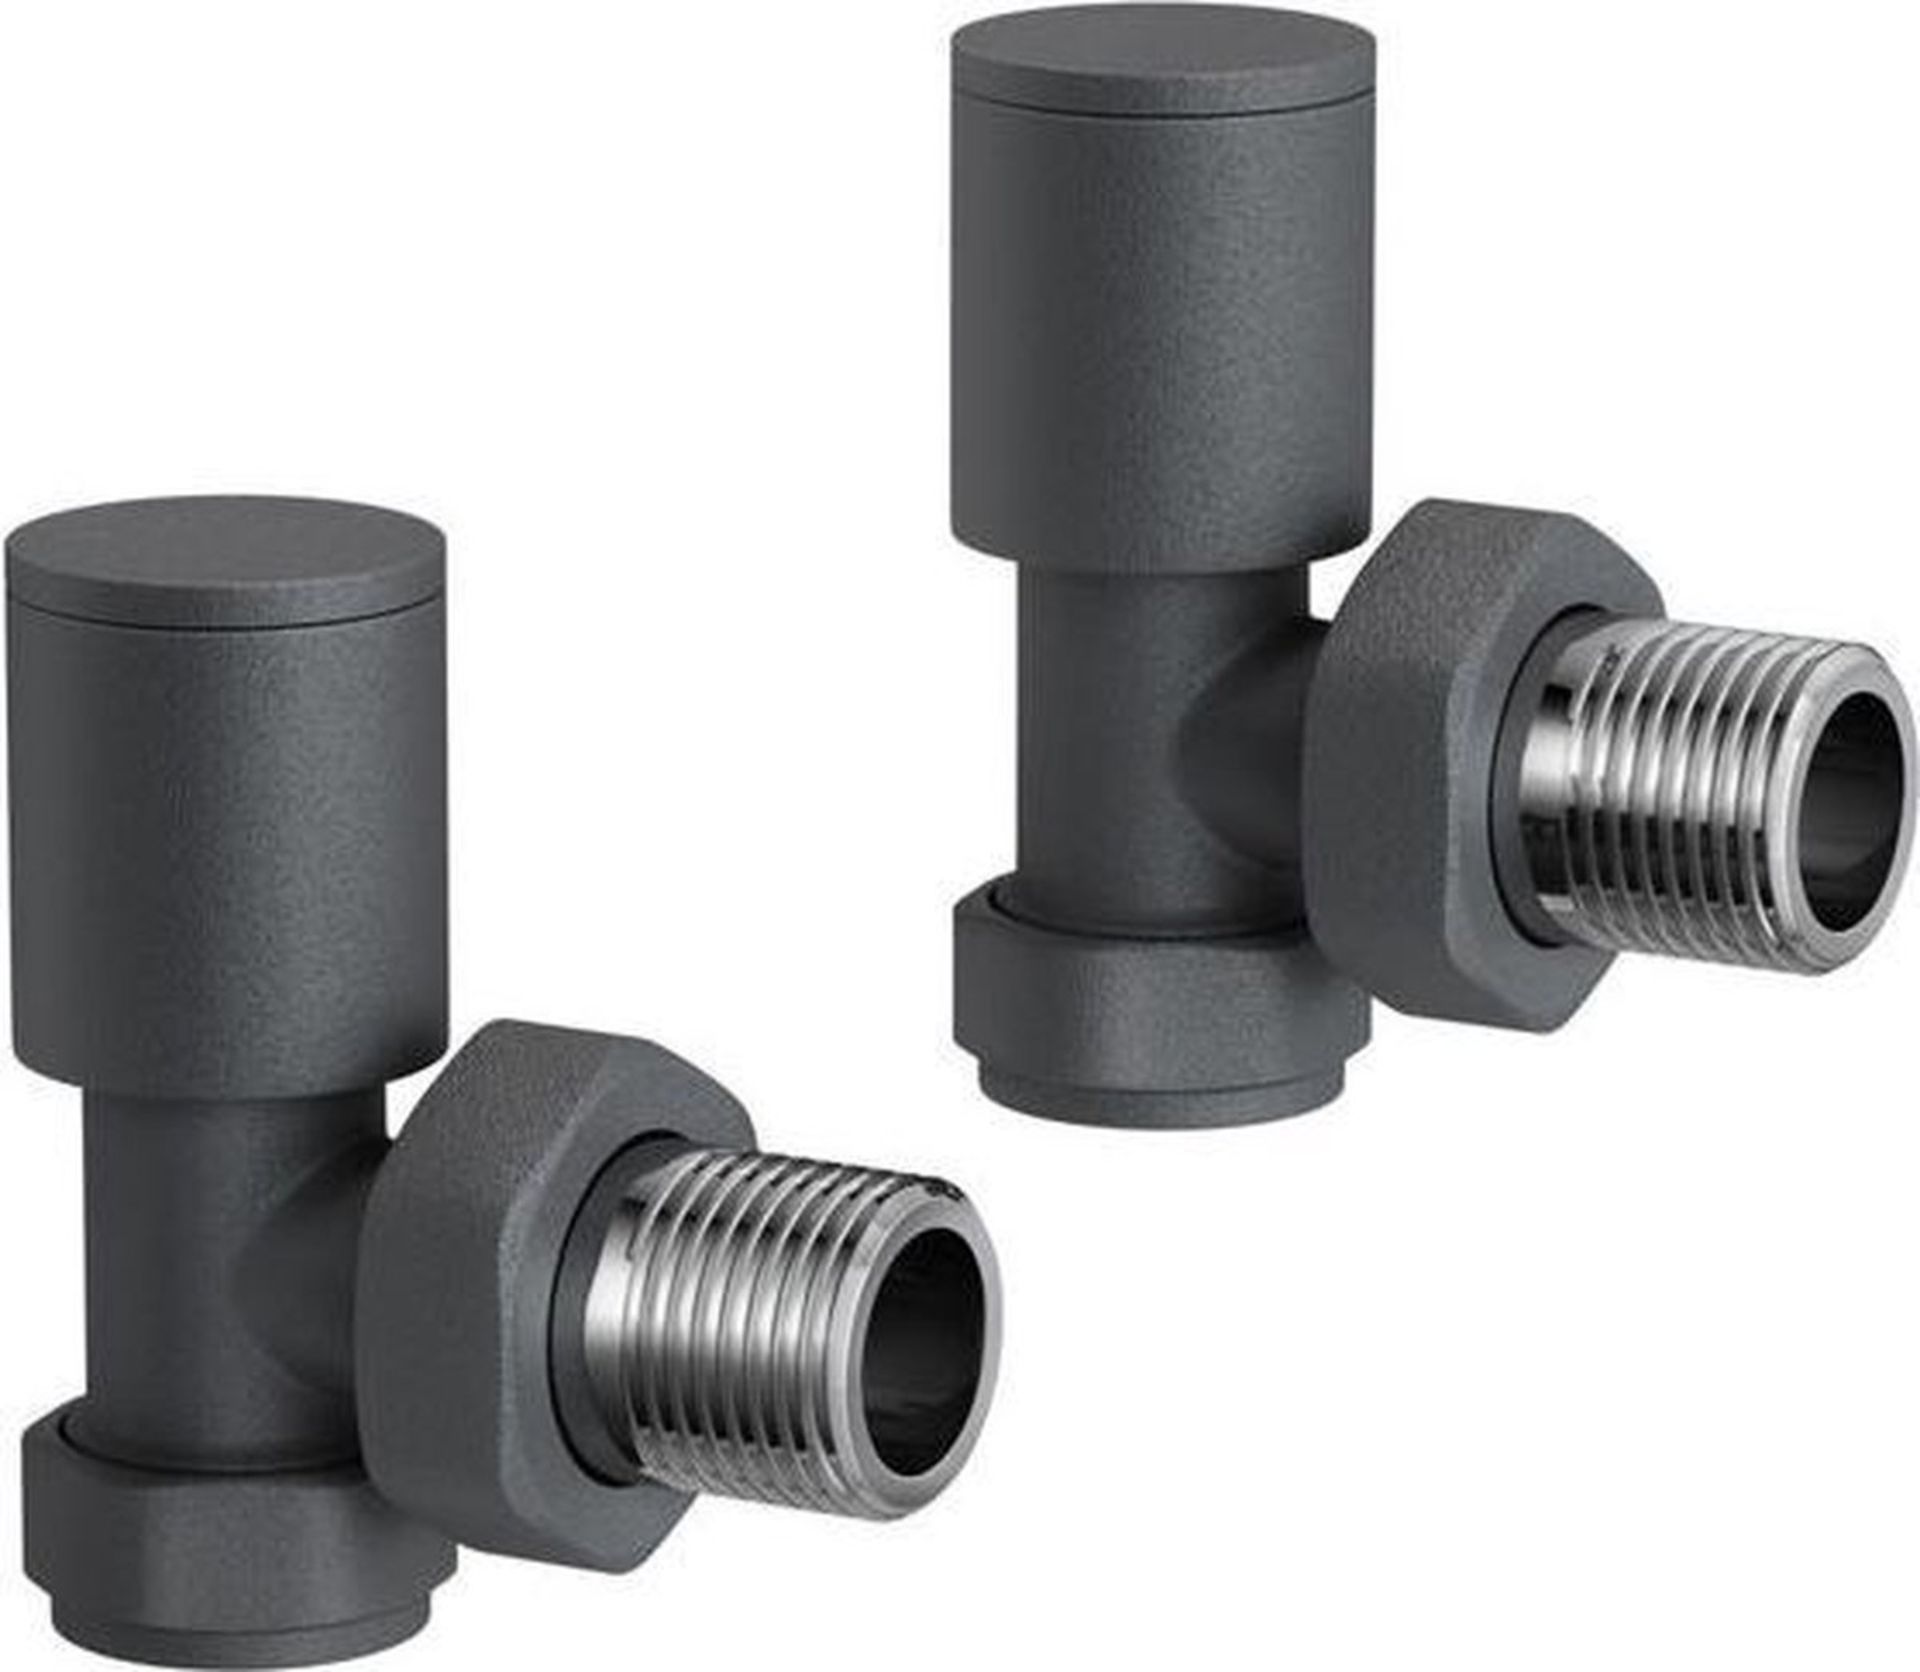 NEW & BOXED 15 mm Standard Connection Square Angled Anthracite Radiator Valves. RA03A. Complies with